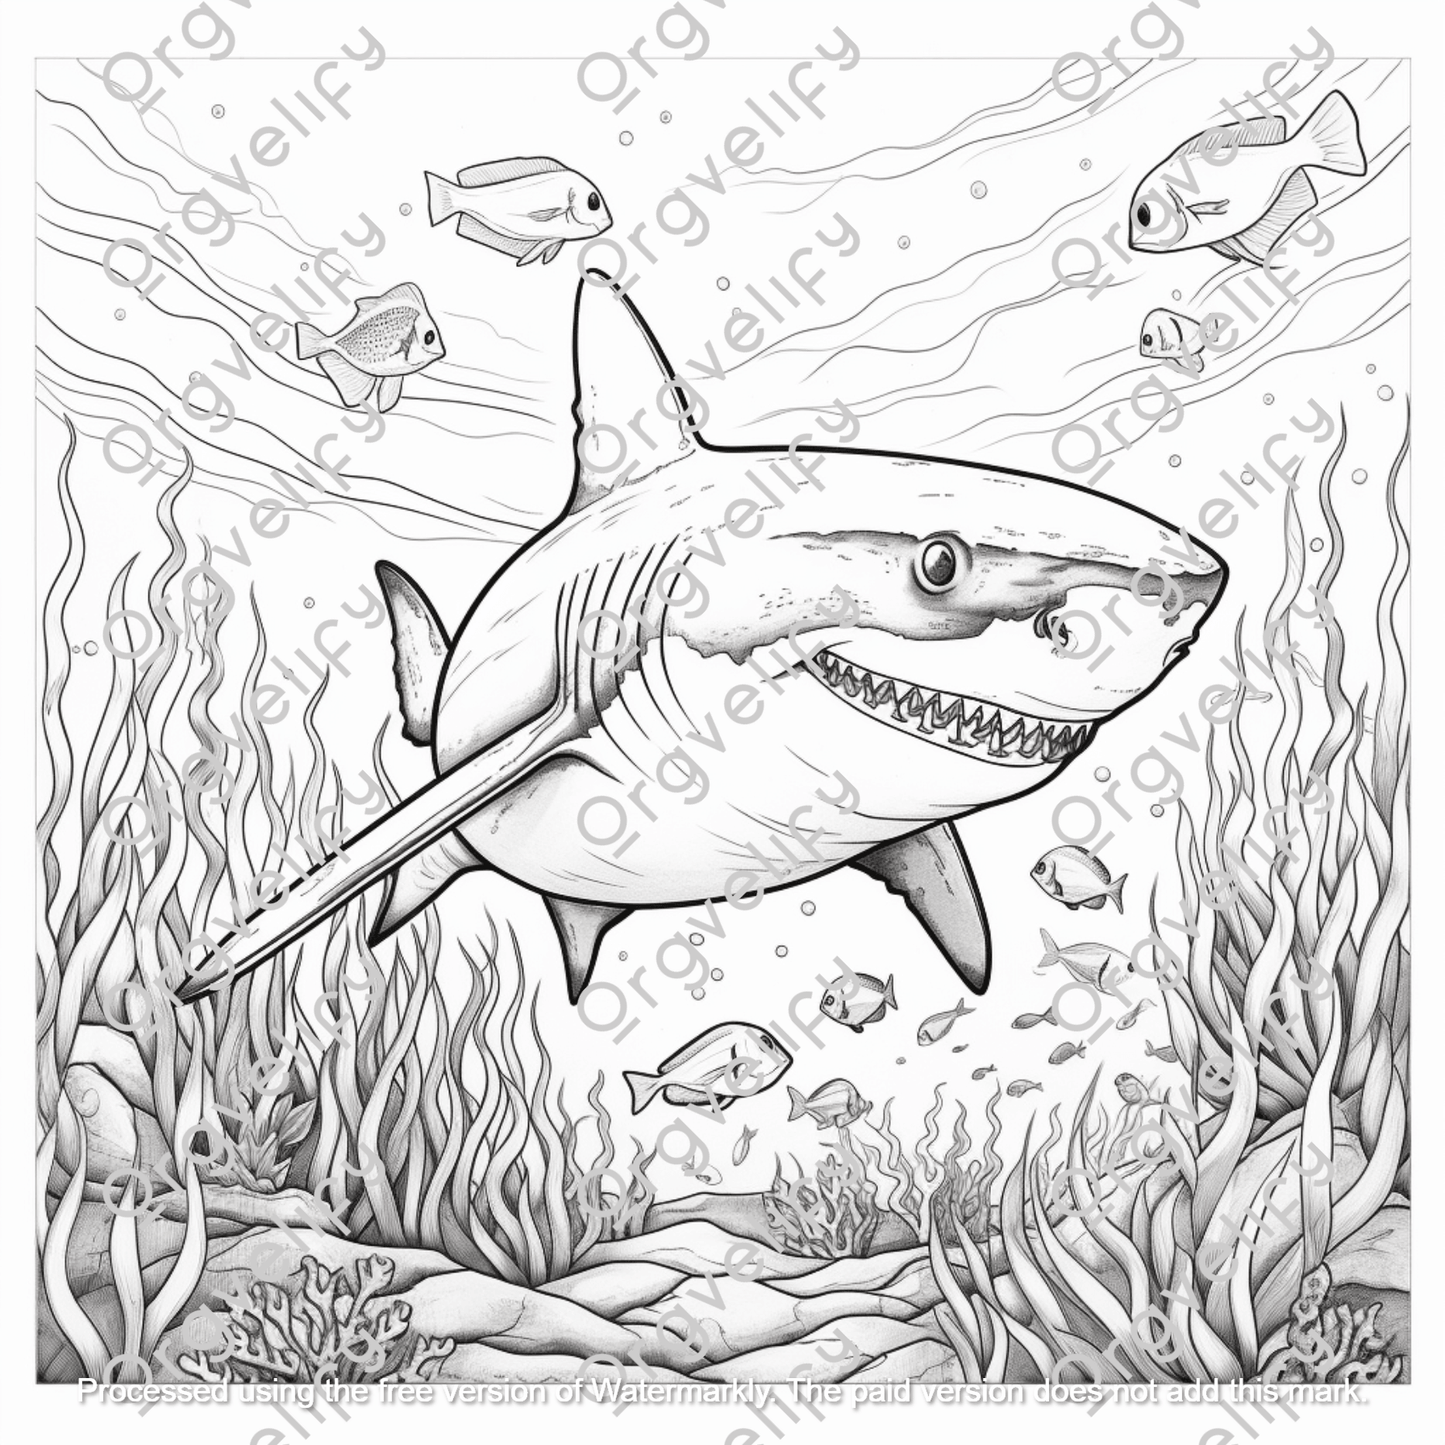 All About Sharks Coloring Book - Orgvelify